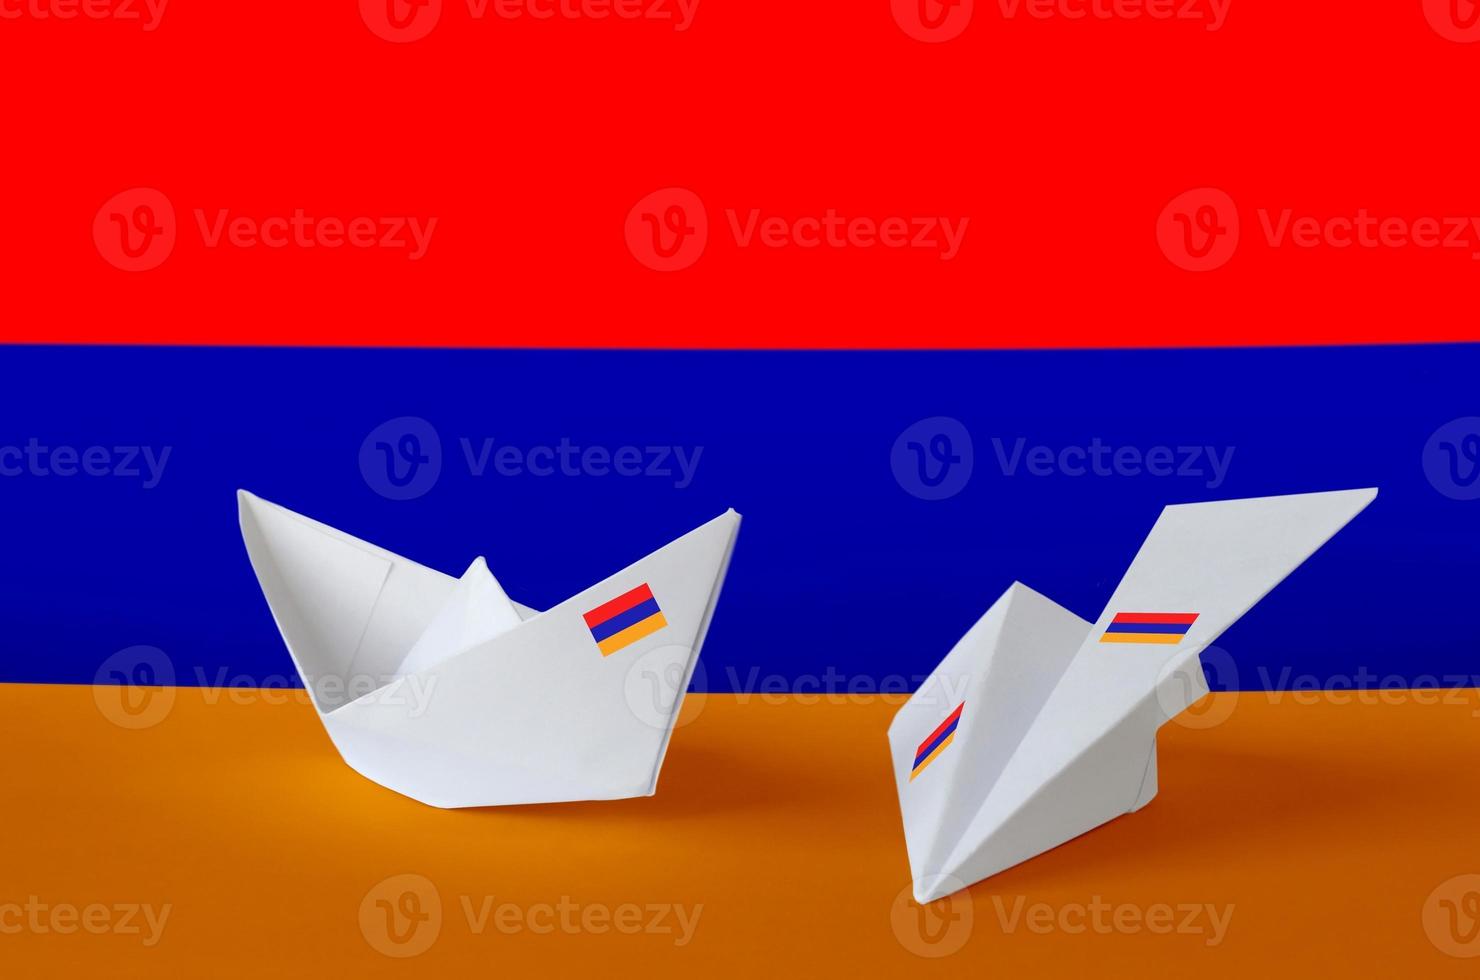 Armenia flag depicted on paper origami airplane and boat. Handmade arts concept photo